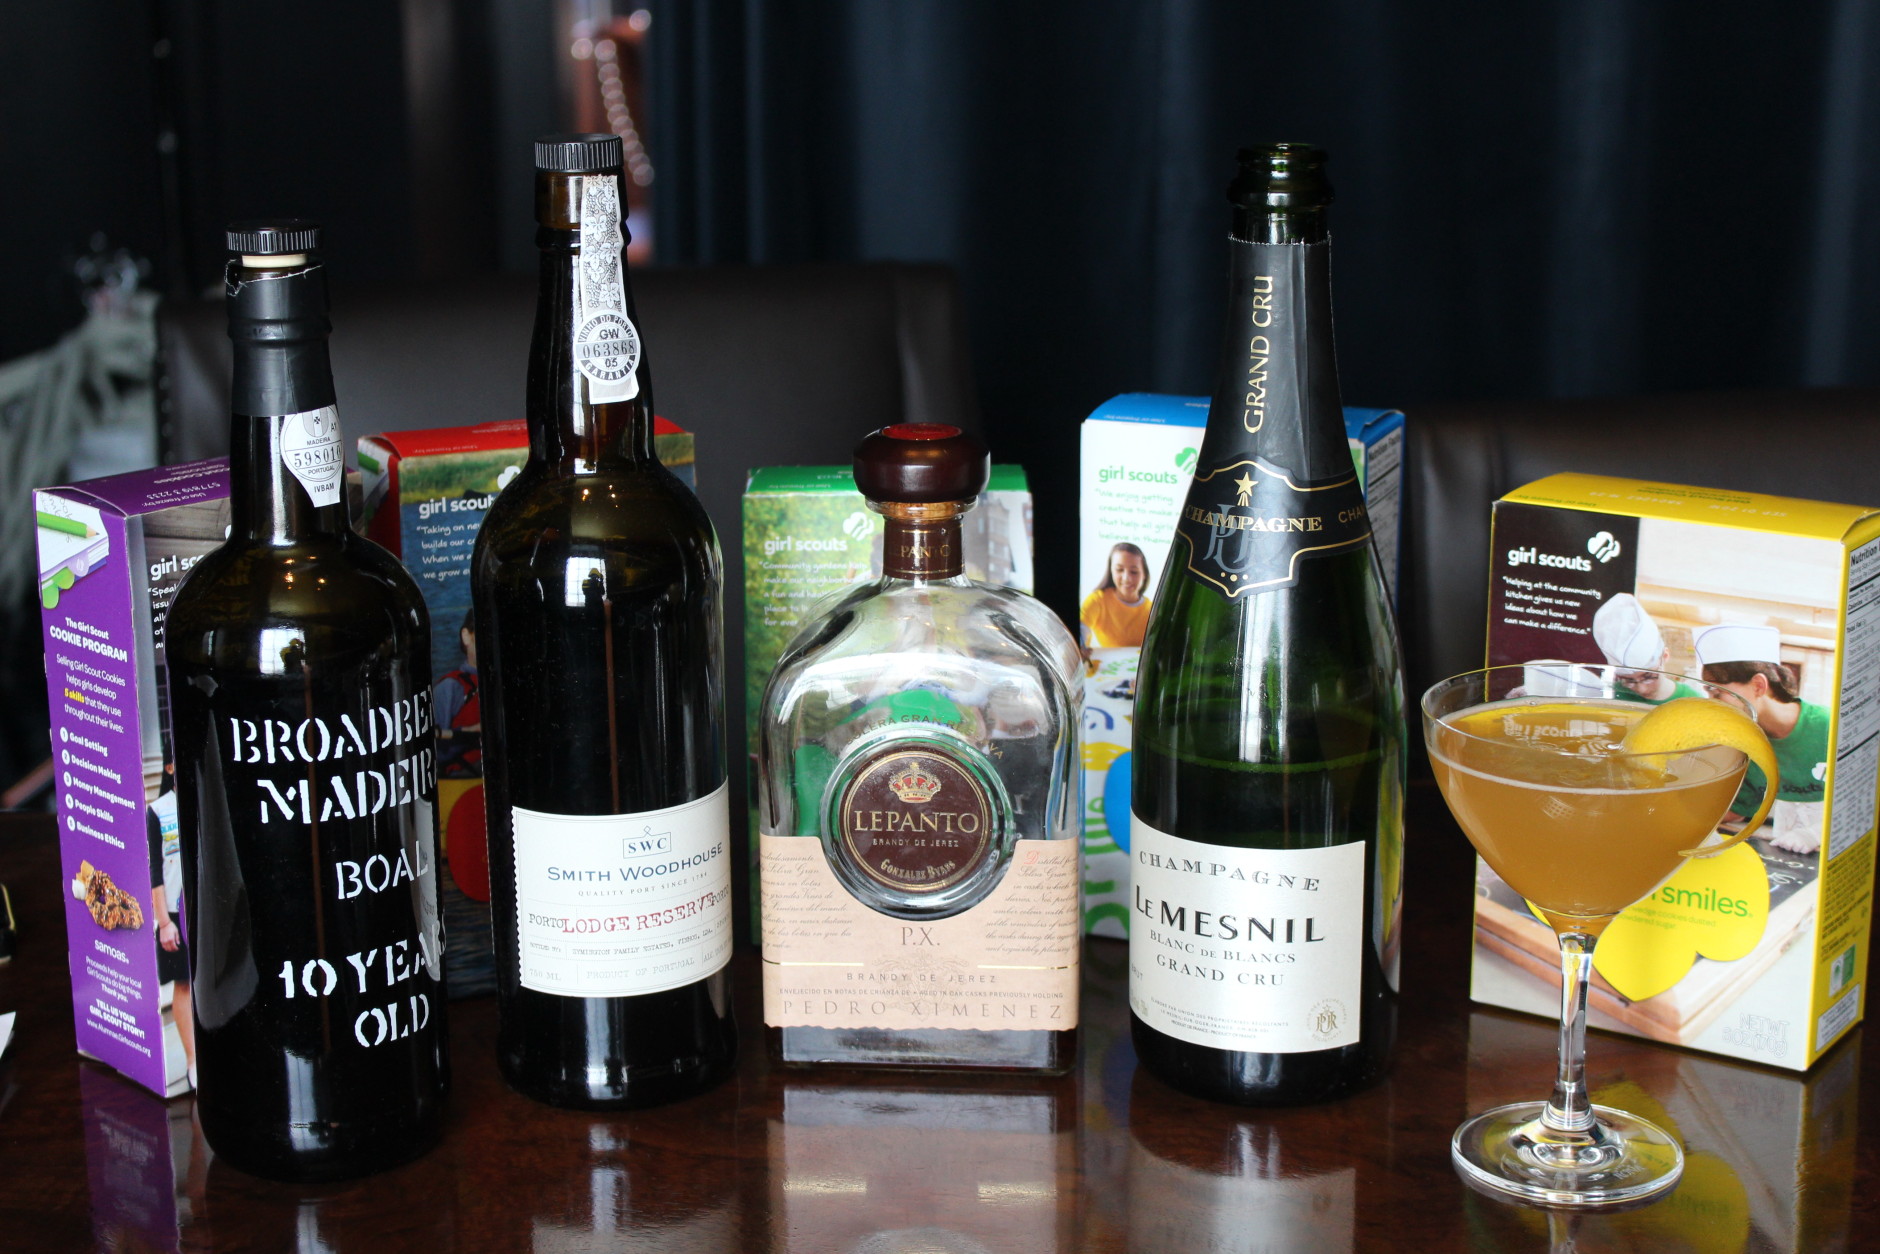 Girl scout cookies with their cocktail and spirit pairings. (WTOP/Dana Gooley)